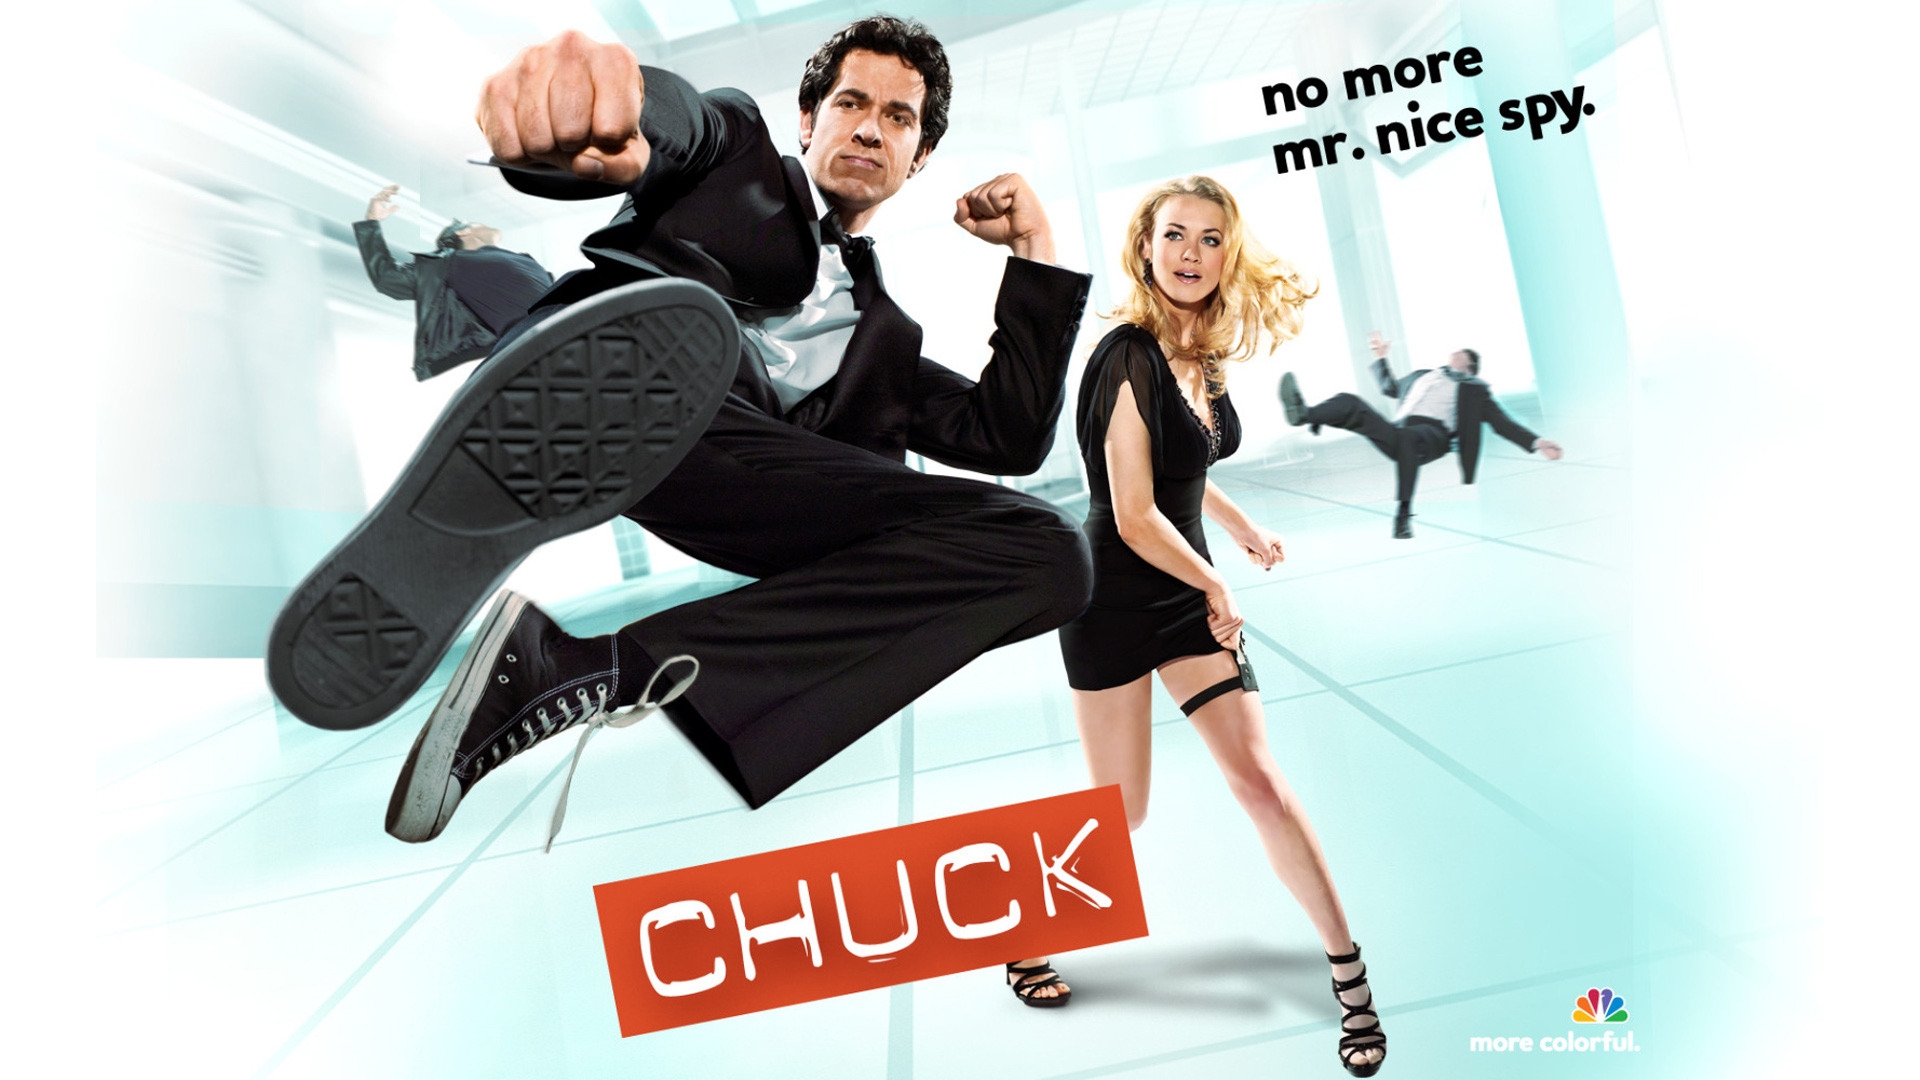 Kung Fu Chuck for 1920 x 1080 HDTV 1080p resolution